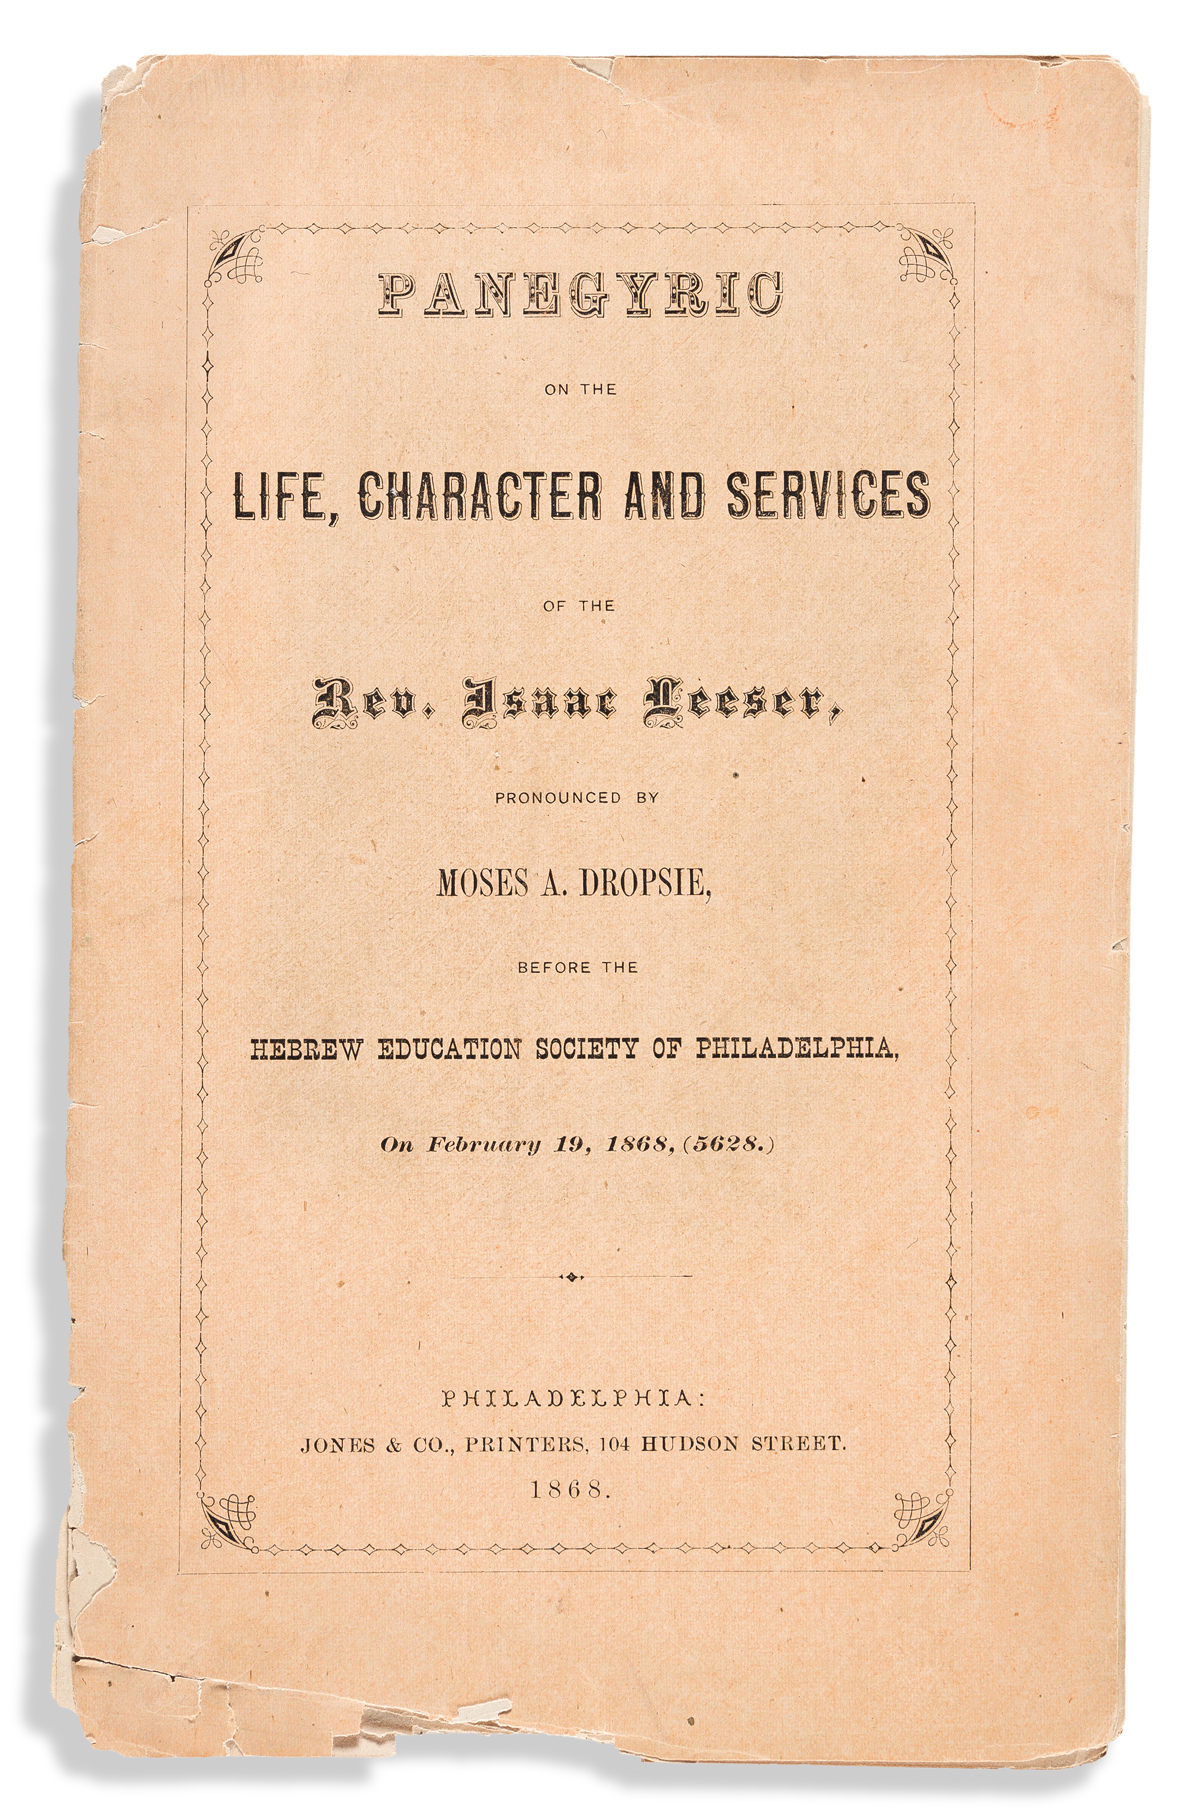 (JUDAICA.) Moses A. Dropsie. Panegyric on the Life, Character and Services of the Rev. Isaac Leeser.